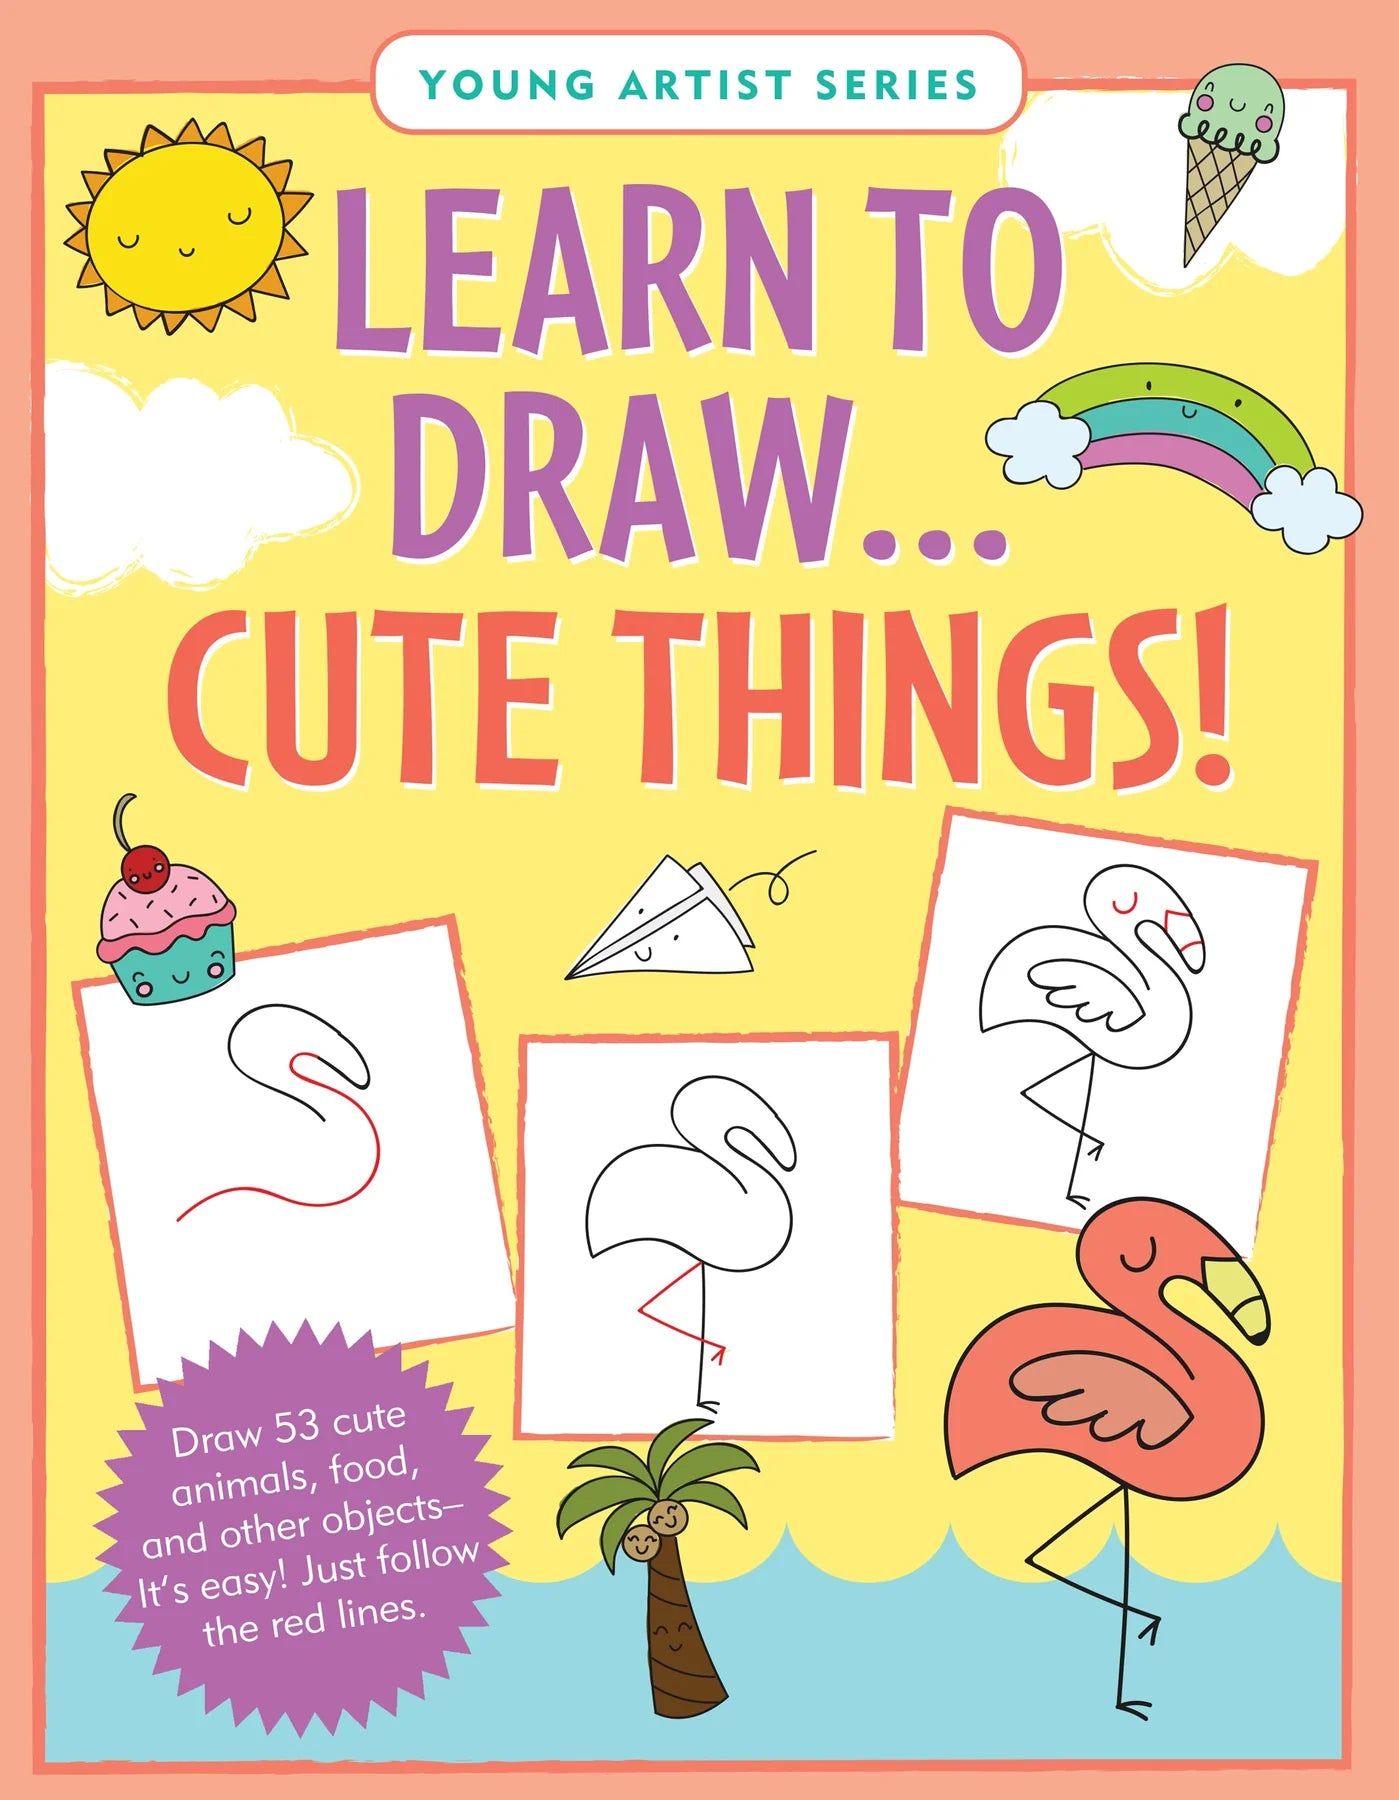 Sticker Book Covers & Sticker Pages by Kim Short